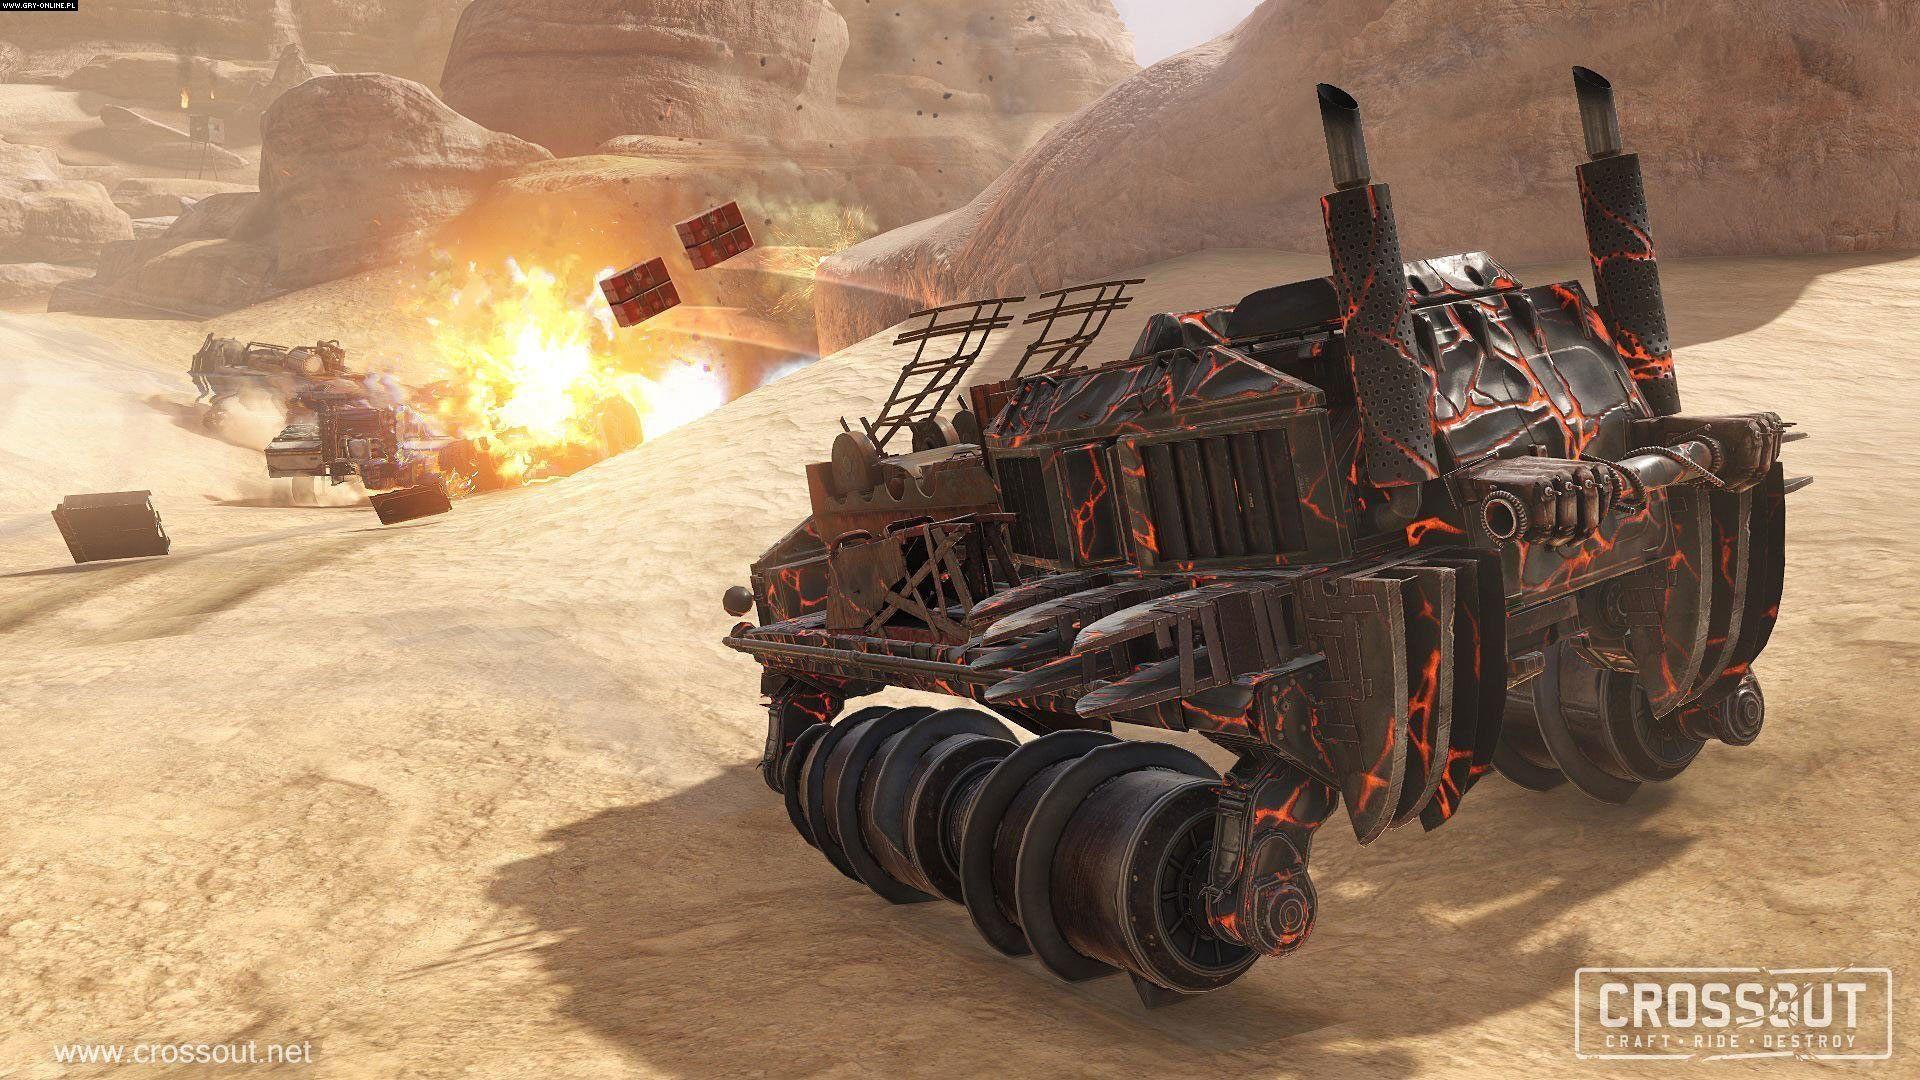 Crossout Game Download. play for free mmo action game crossout mmo